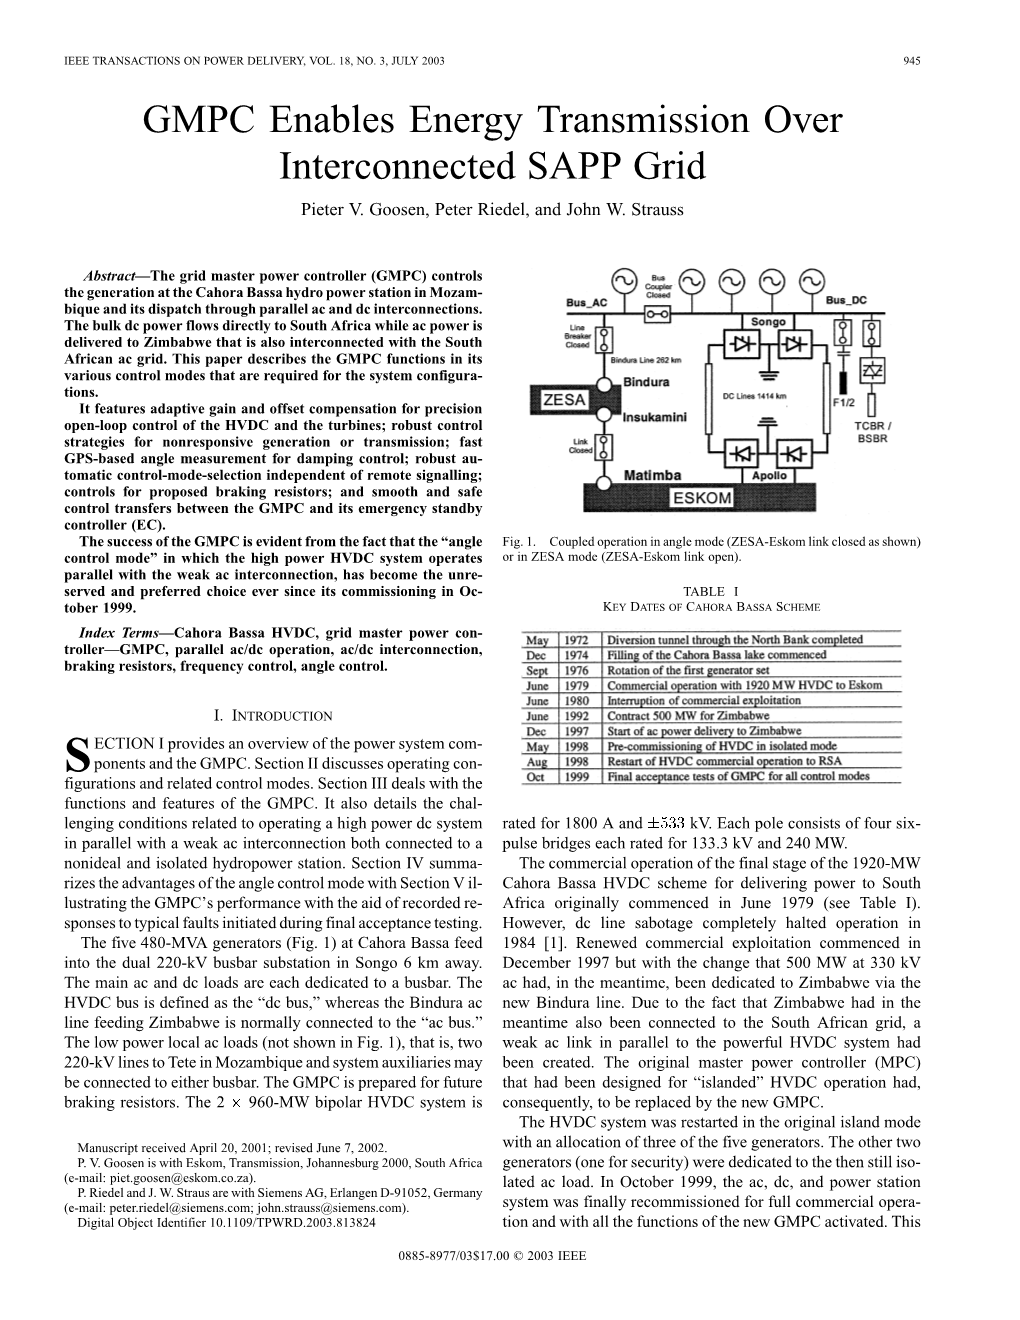 GMPC Enables Energy Transmission Over Interconnected SAPP Grid Pieter V